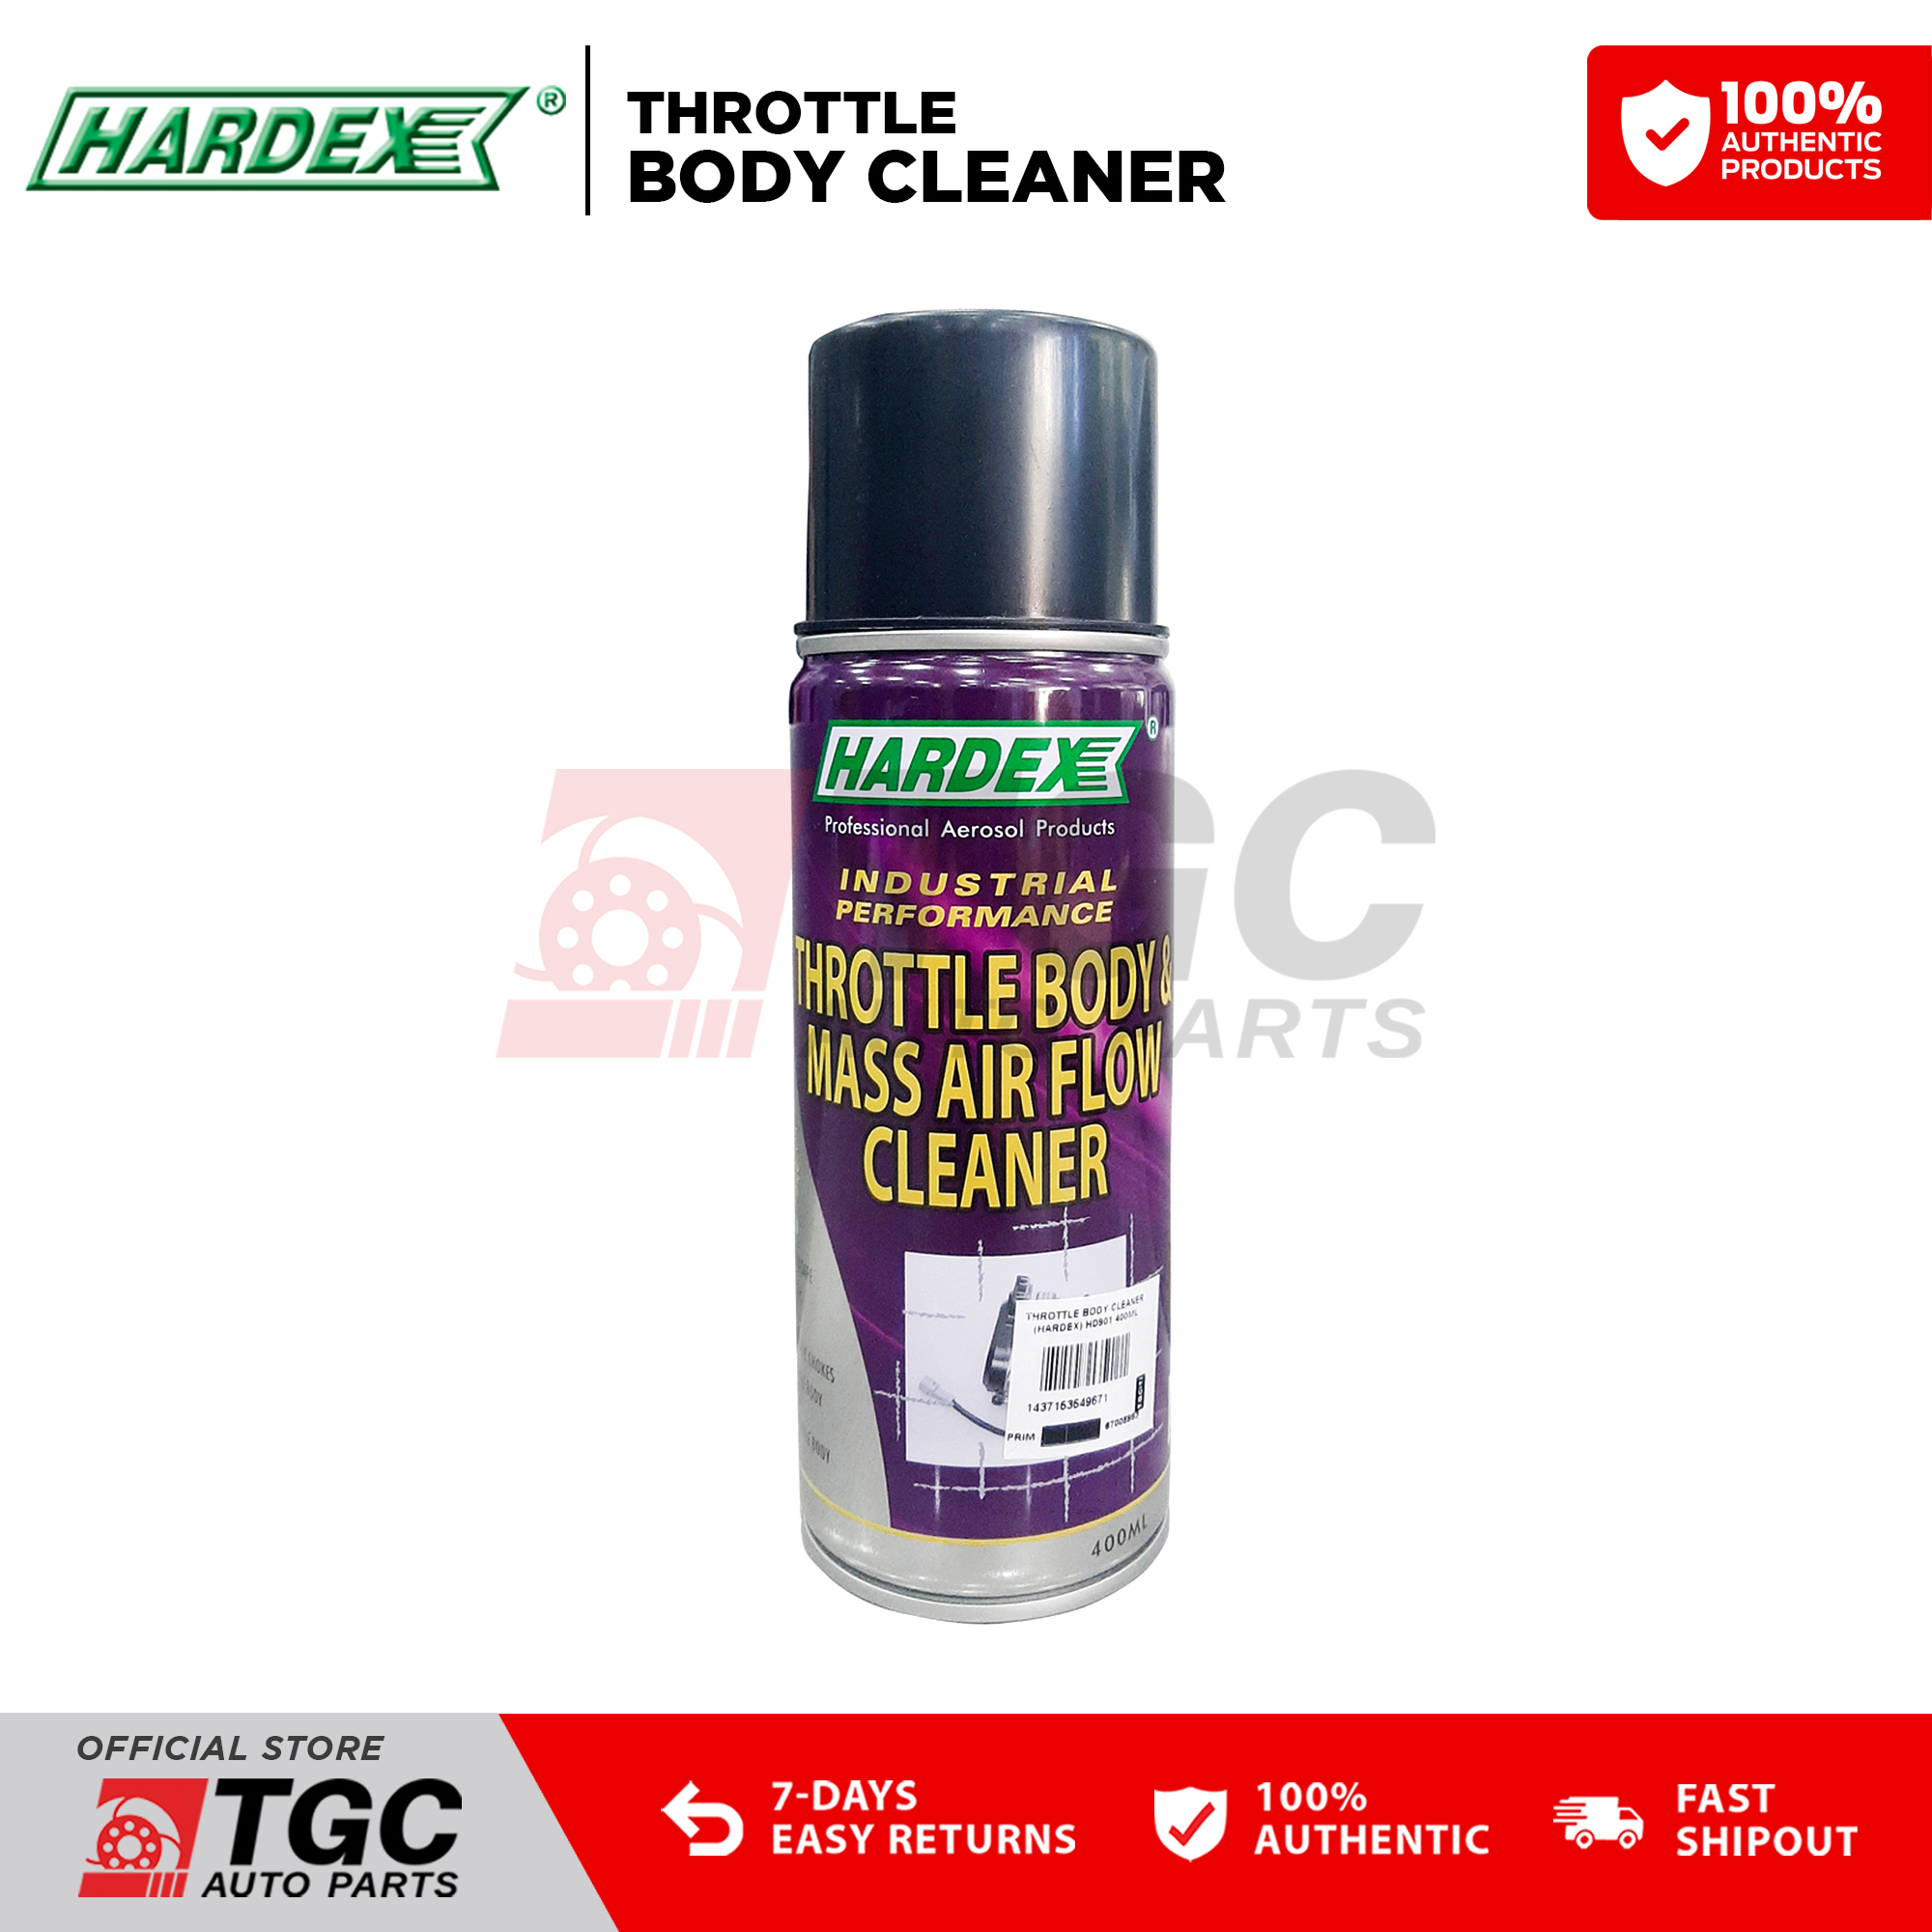 Hardex Throttle Body & Mass Air Flow Cleaner 400 ml ‣ ExcelSure Marketing  Corporation